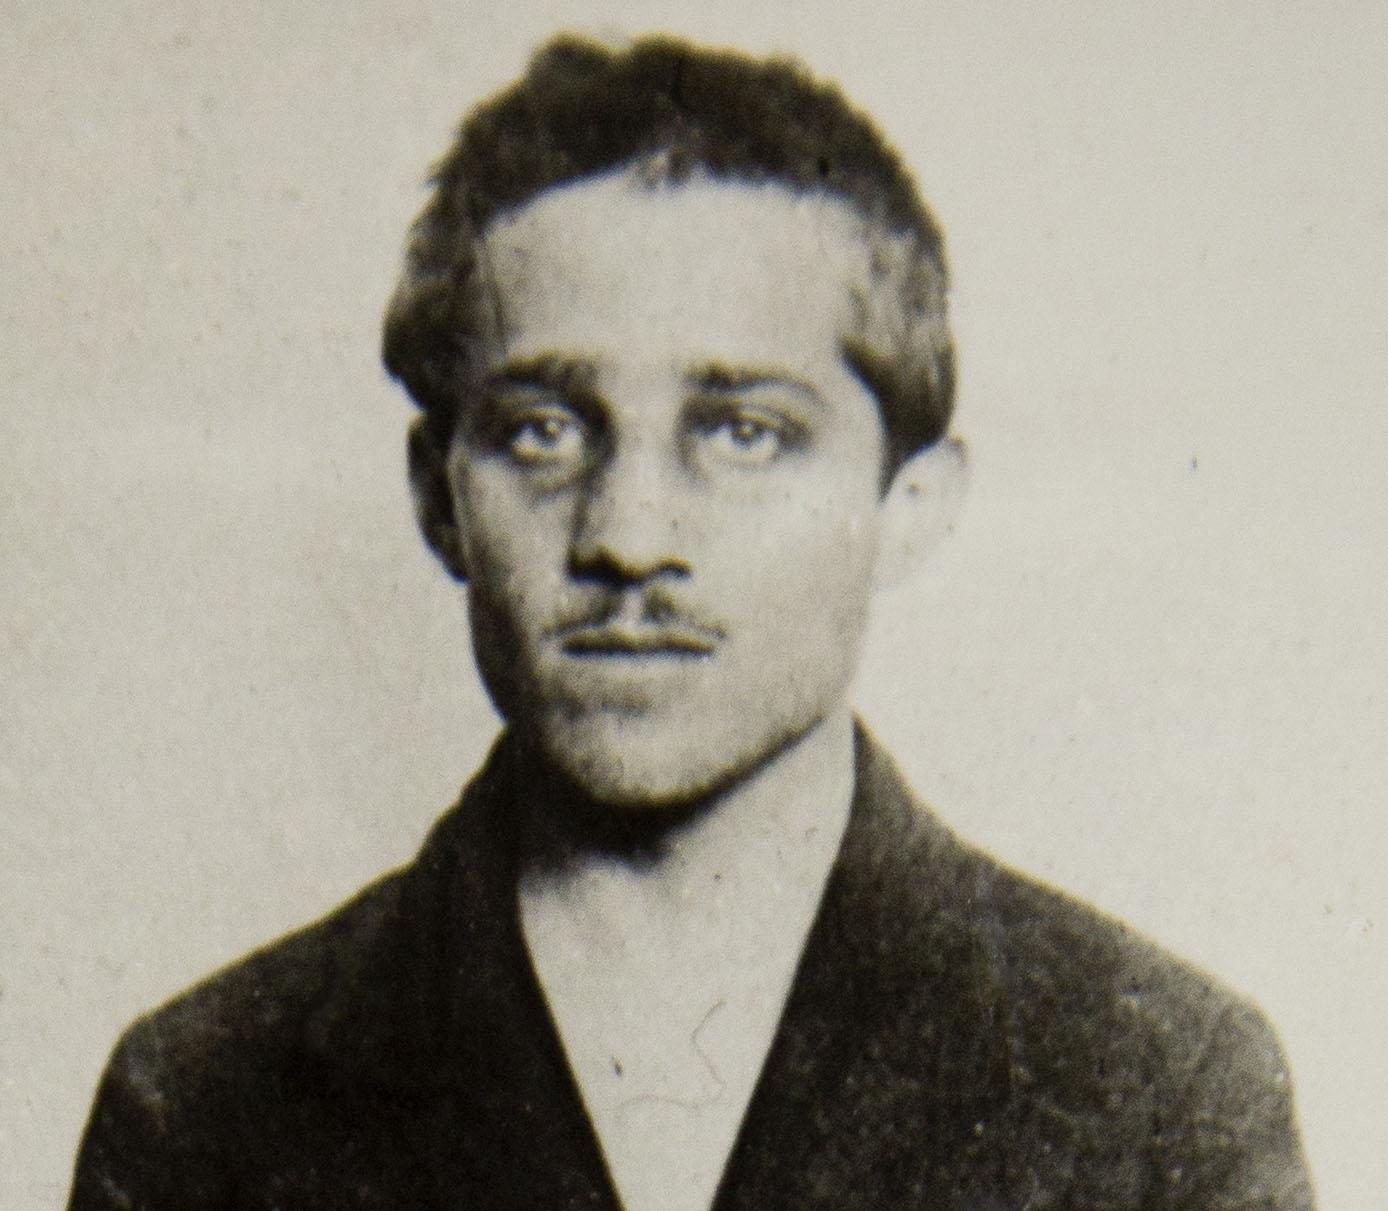 8. Gavrilo Princip
Despite his name, Gavrilo Princip can hardly be described as a man of high principles. He was born to Bosnian Serb peasants, 
and Princip was trained as a terrorist by the Serbian secret society known as the Black Hand. 
Princip waited in ambush for his victim and shot him to death on June 28.